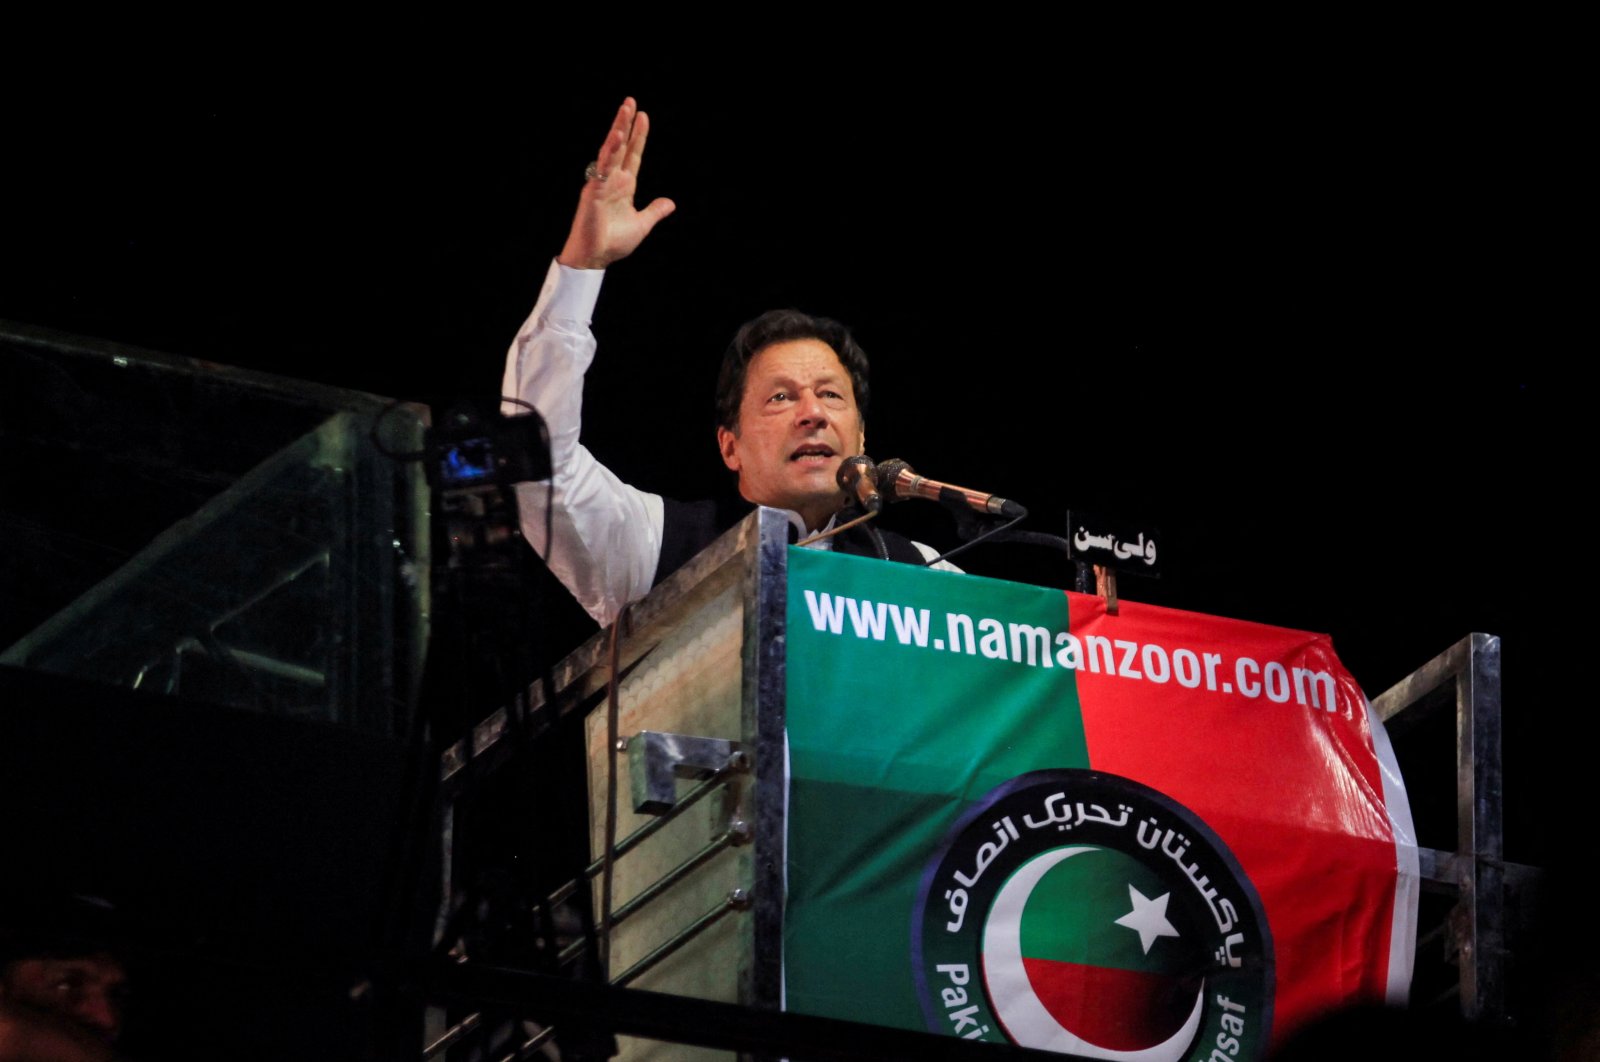 Former Pakistani Prime Minister Imran Khan gestures as he addresses supporters during a rally in Lahore, Pakistan, April 21, 2022. (Reuters File Photo)